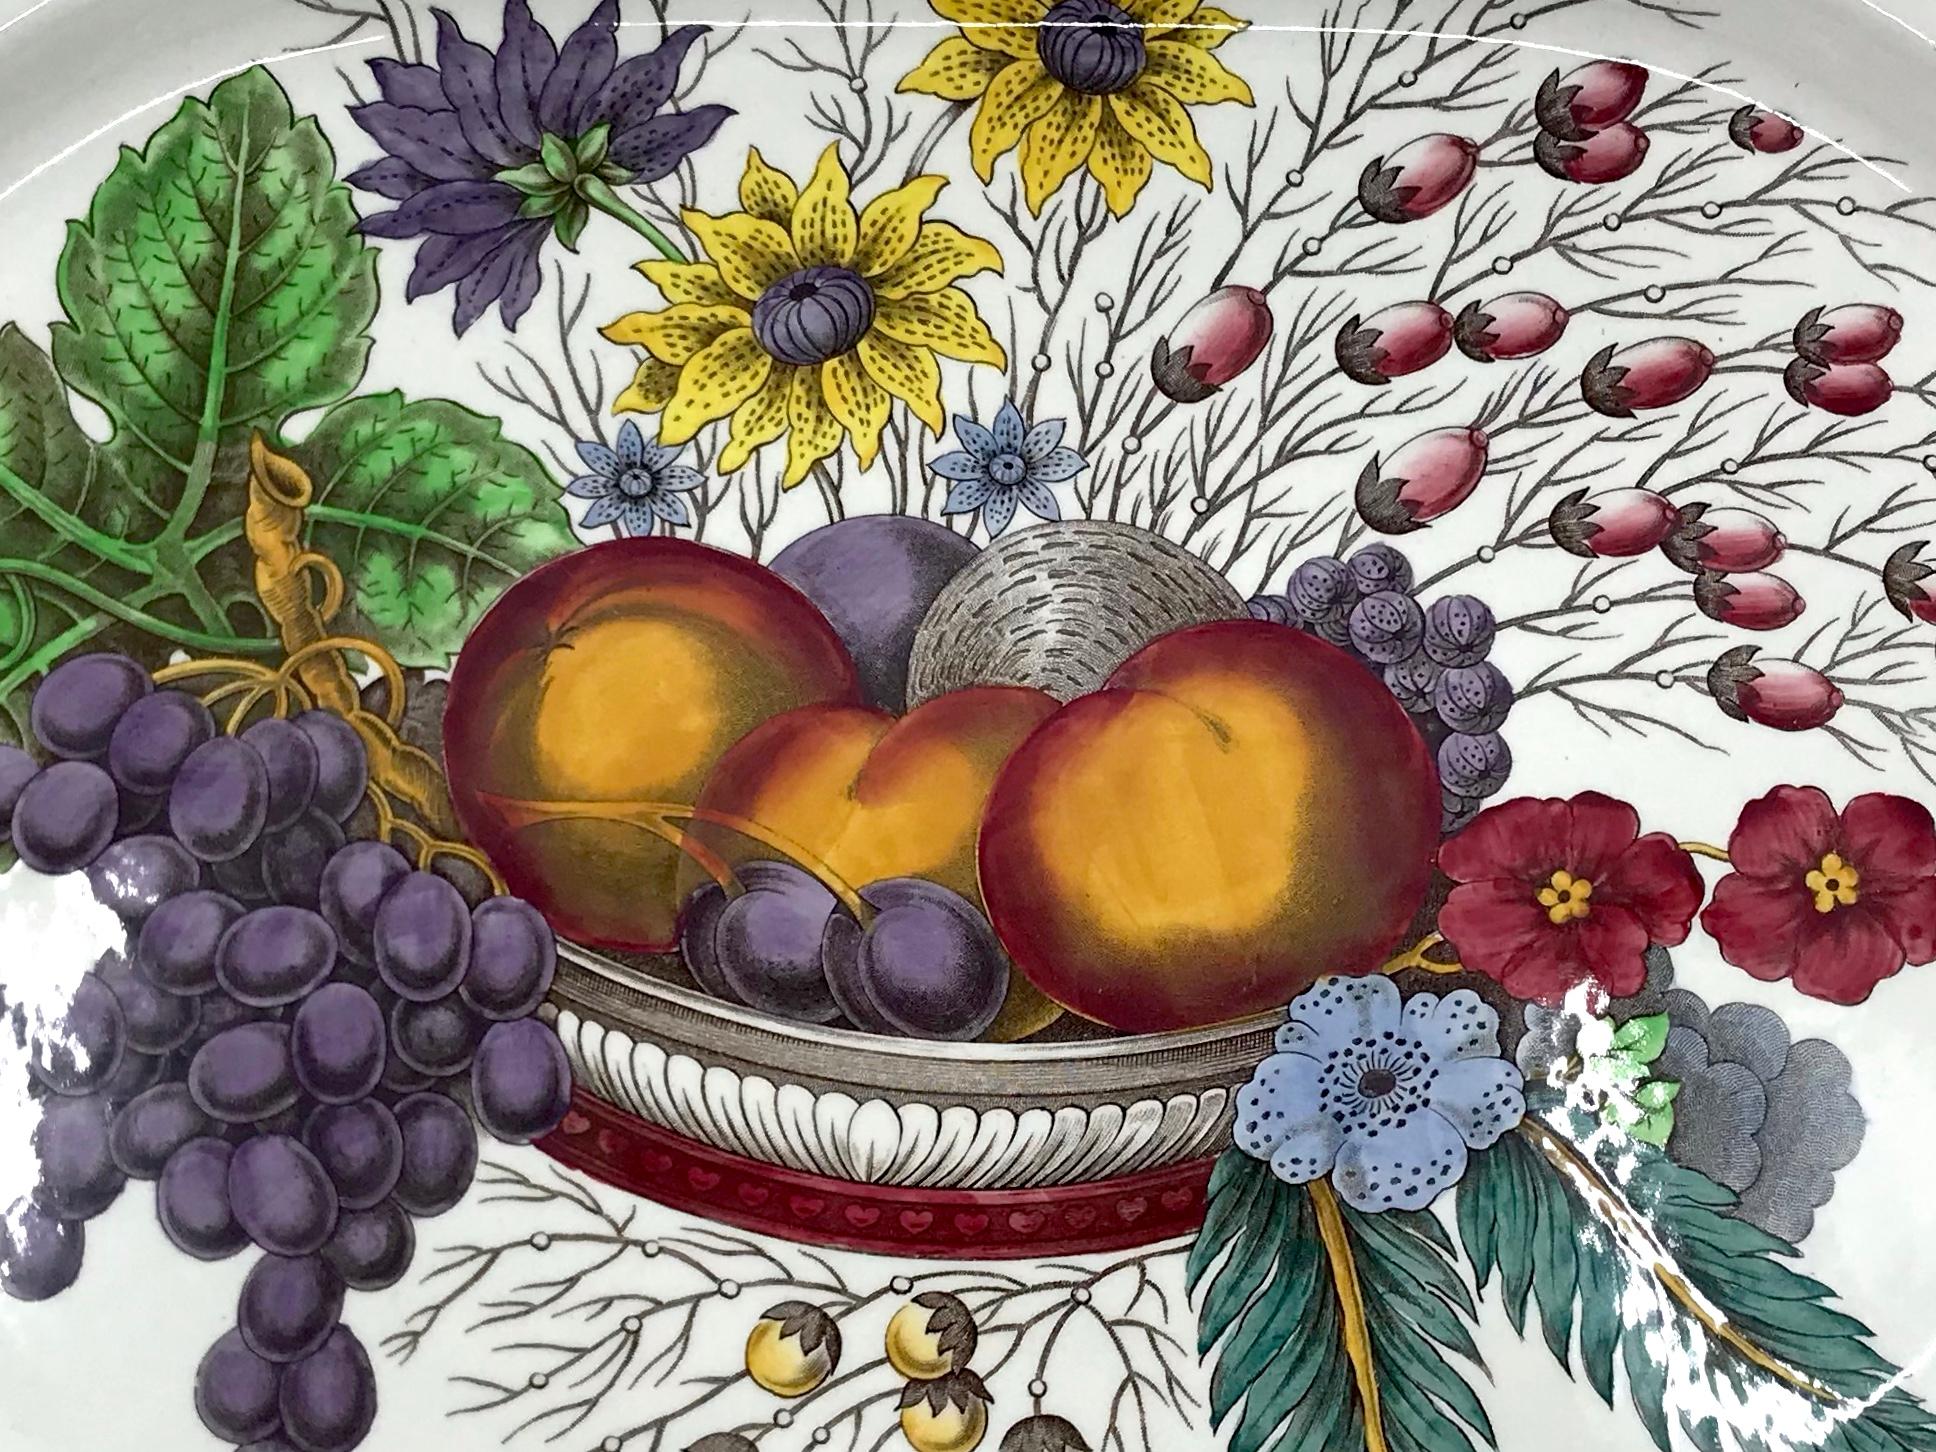 English large harvest platter. Large serving platter with fruit basket and flowers in autumnal colors with markings for Copeland Spode. England, mid 20th century. 
Dimensions: 16.5” W x 13” D x 1.75” H.